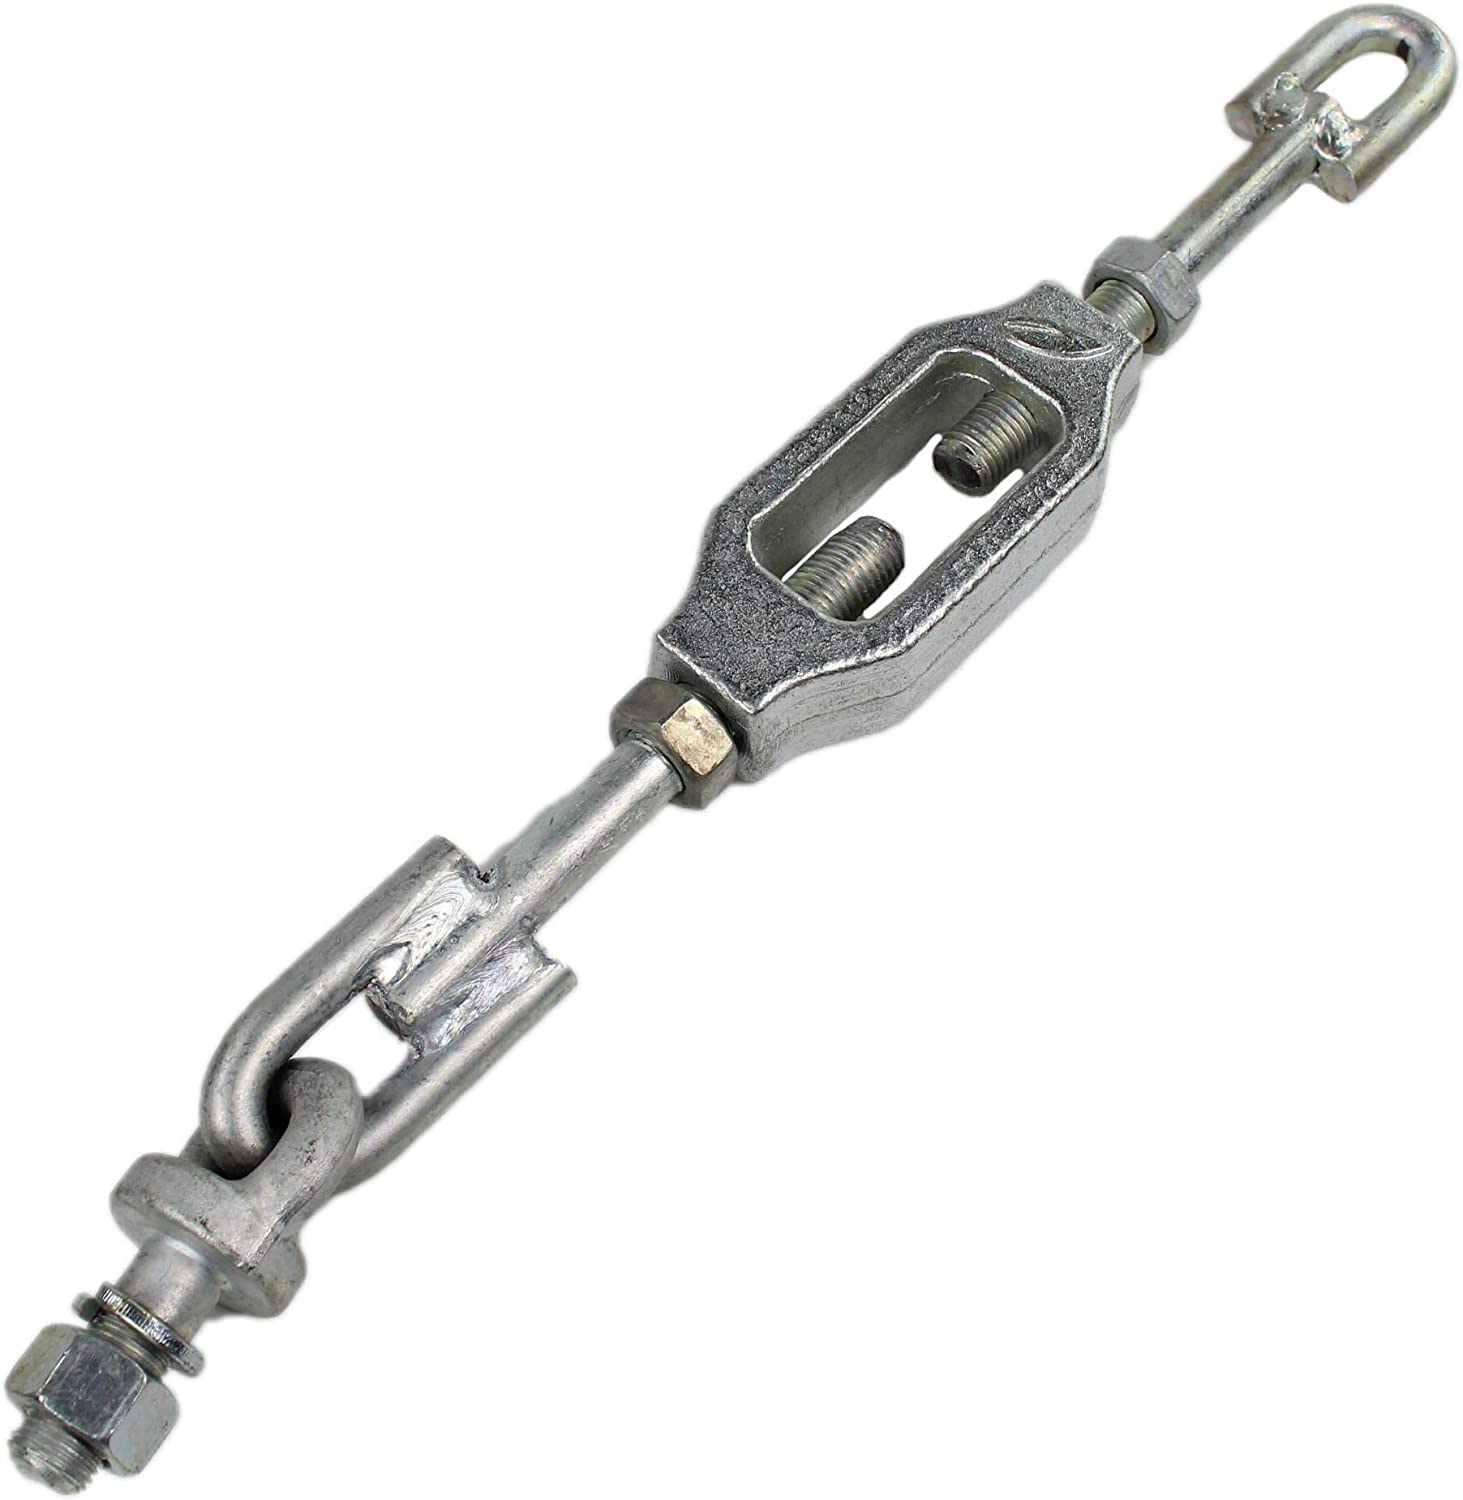 TC222-39700  Check Chain Assembly Fits For Kubota